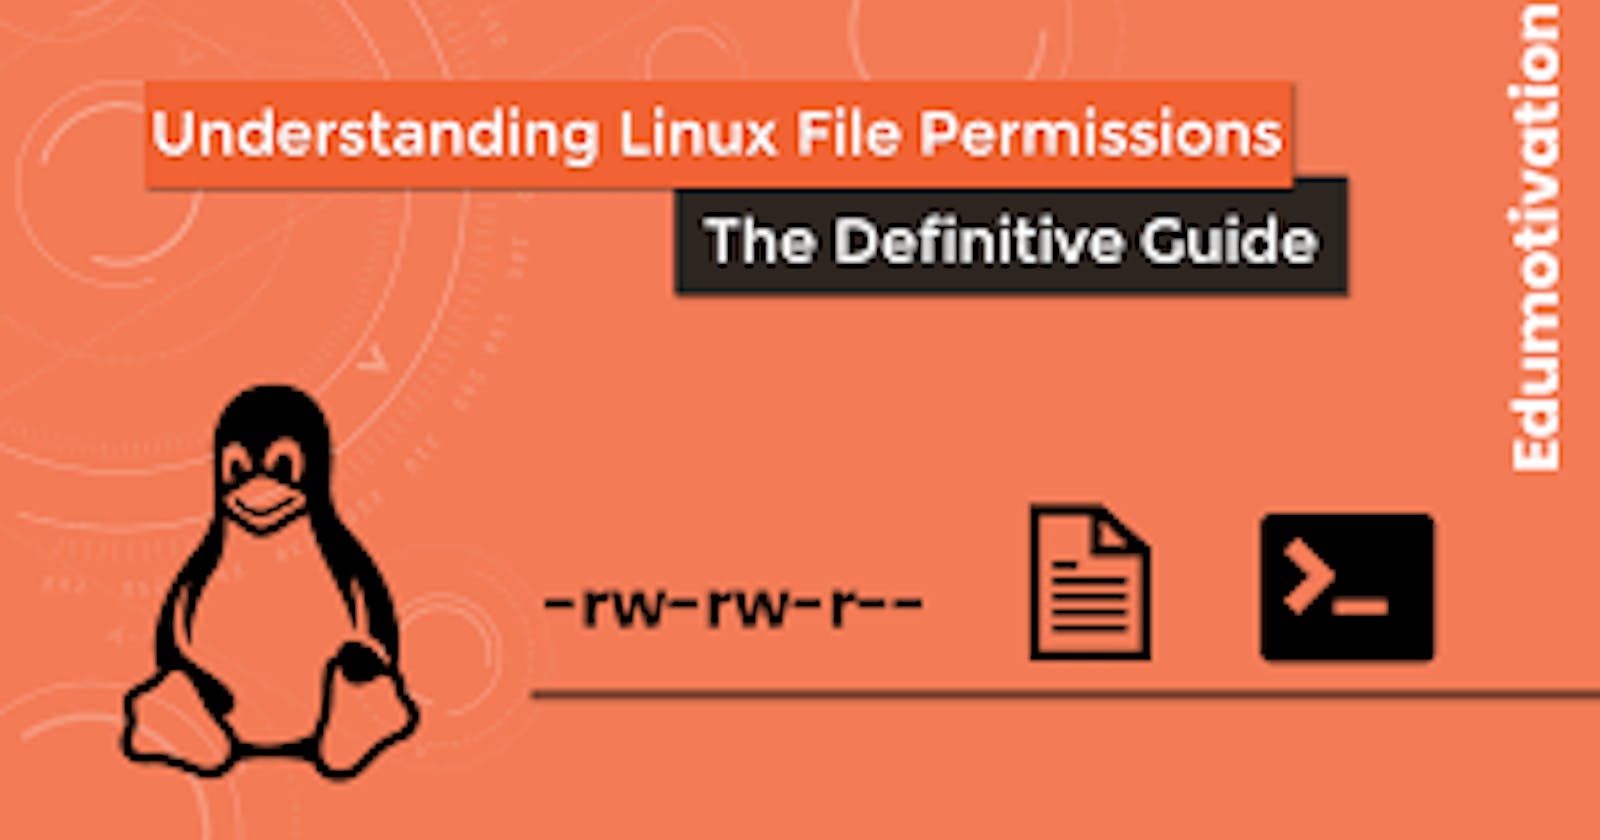 Linux File Permissions And Access Control Lists